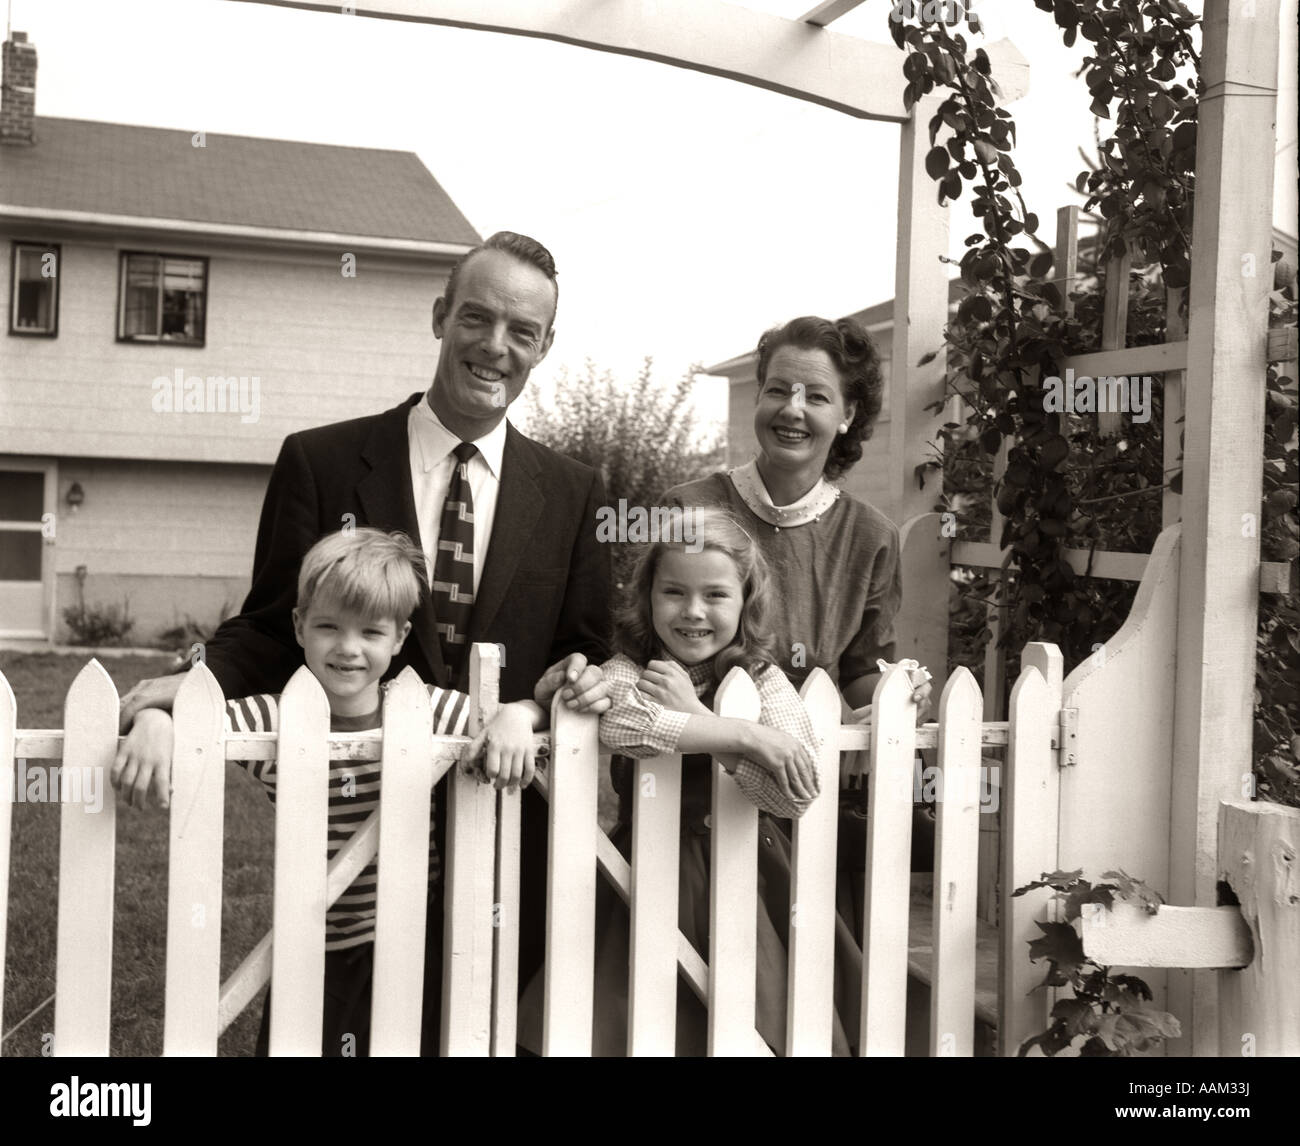 1950s FAMILY OF FOUR BEHIND PICKET FENCE IN BACKYARD SMILING AT CAMERA Stock Photo